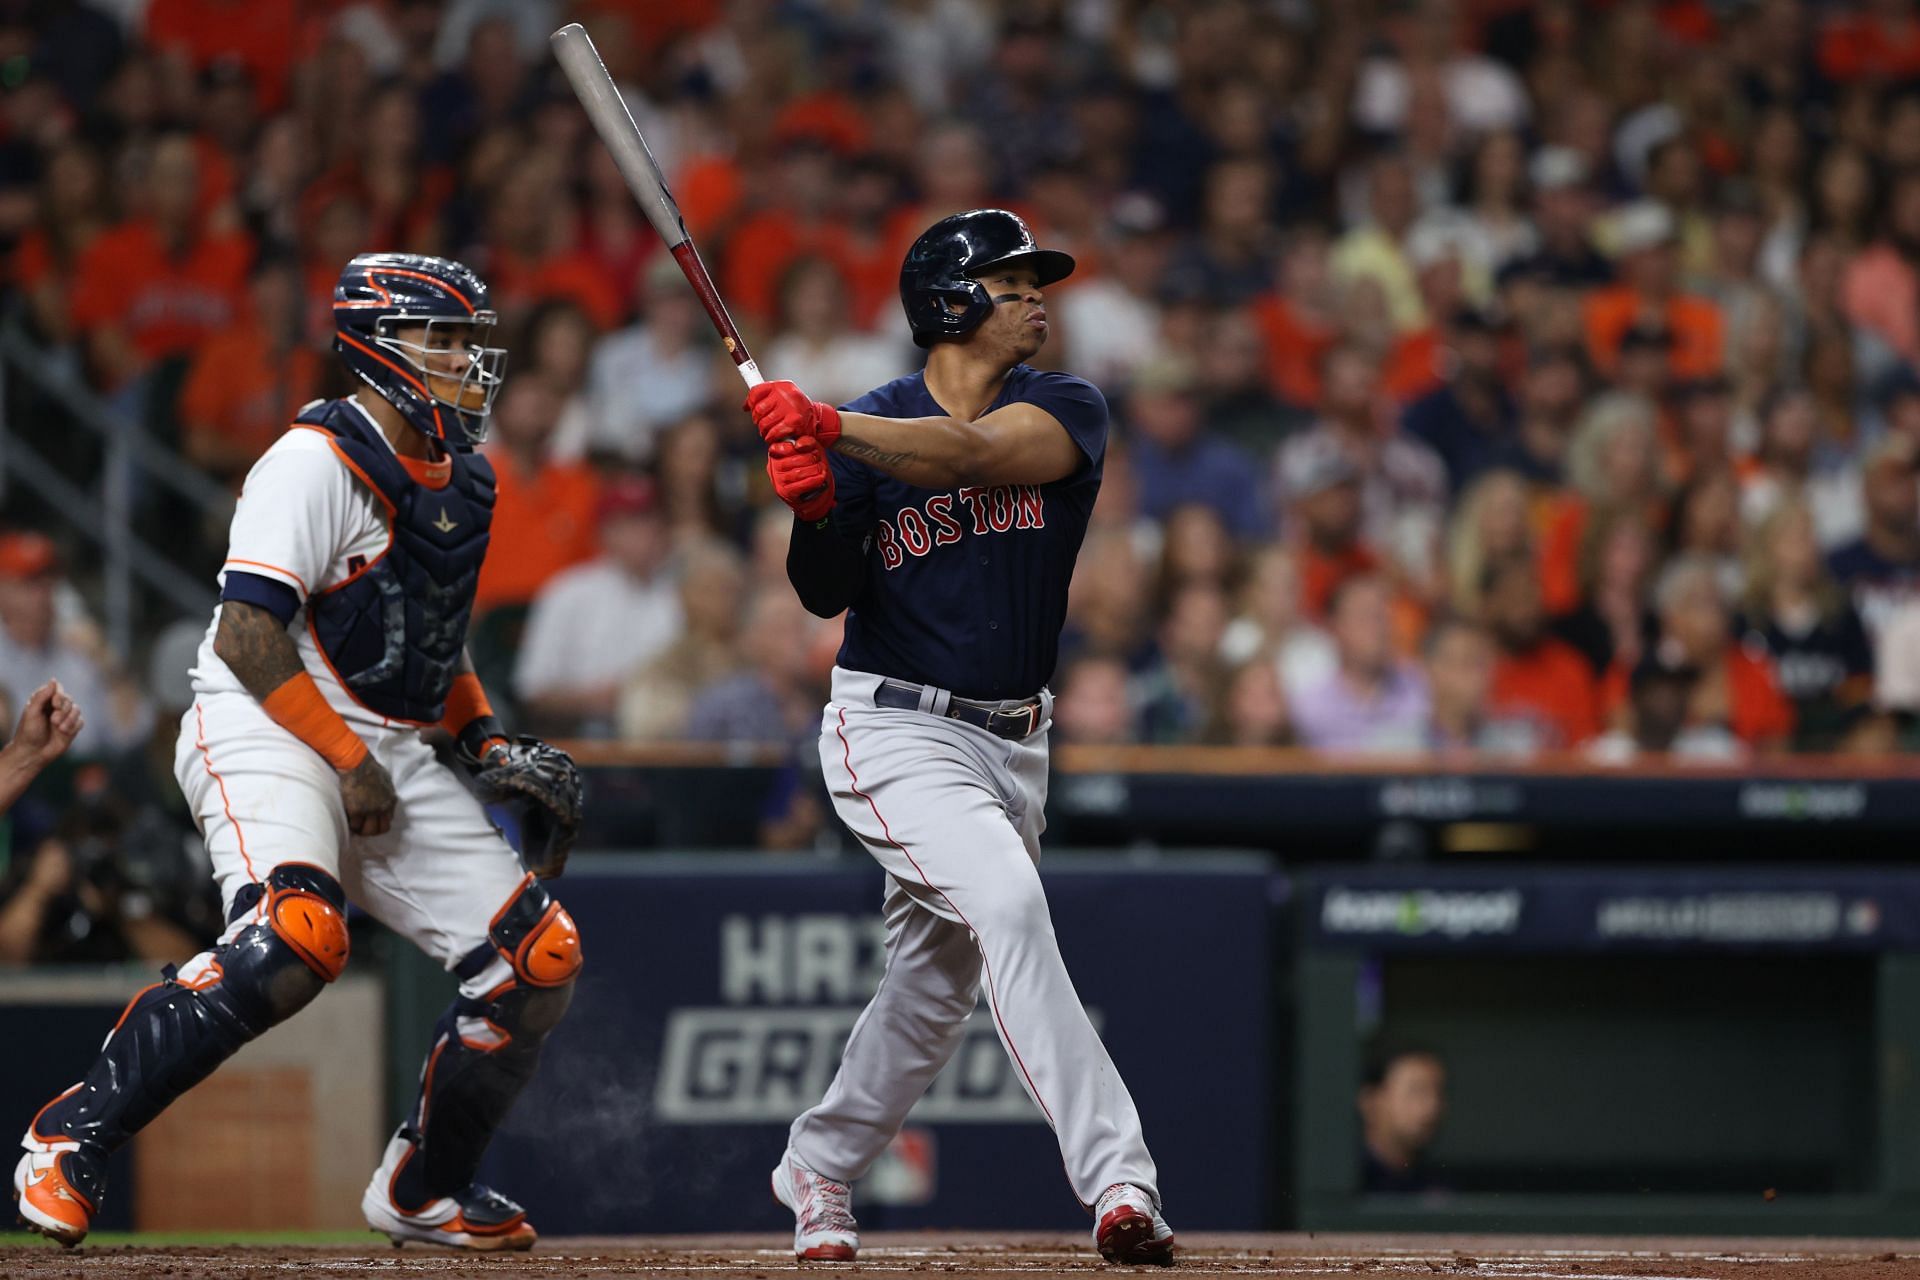 Boston Red Sox 2022 Season Preview Projected Lineups, Rotation, and 3